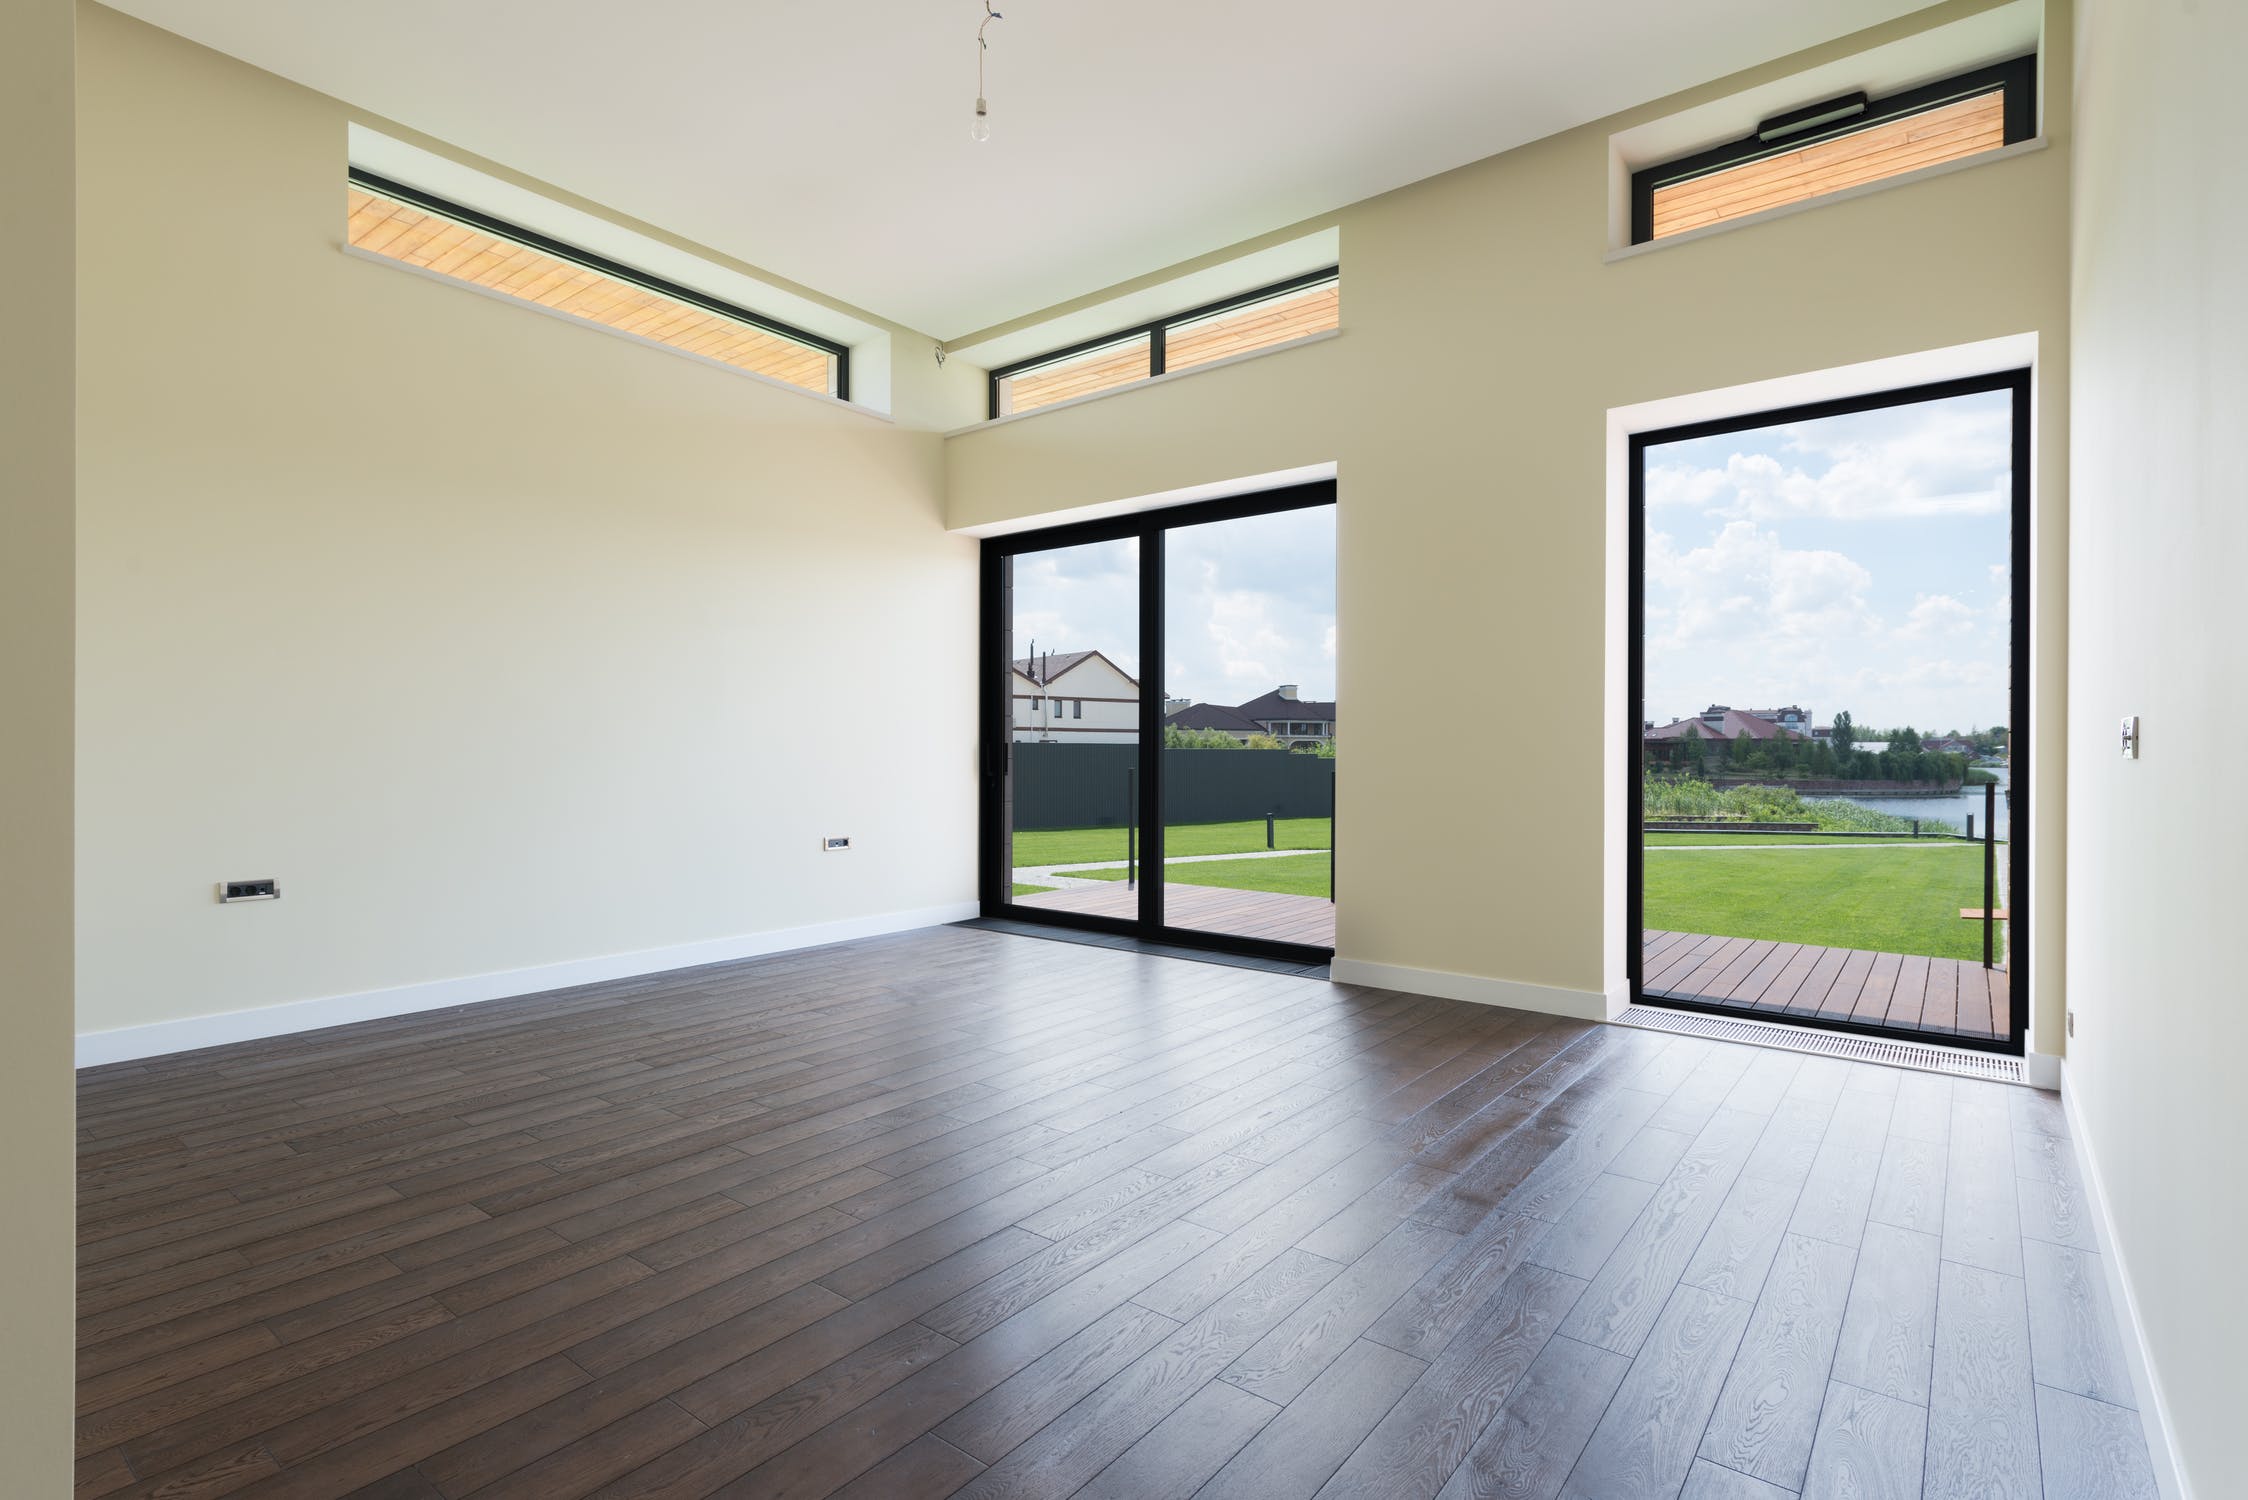 Expert Advice to Buy Aluminium Doors and Windows for Your New Home